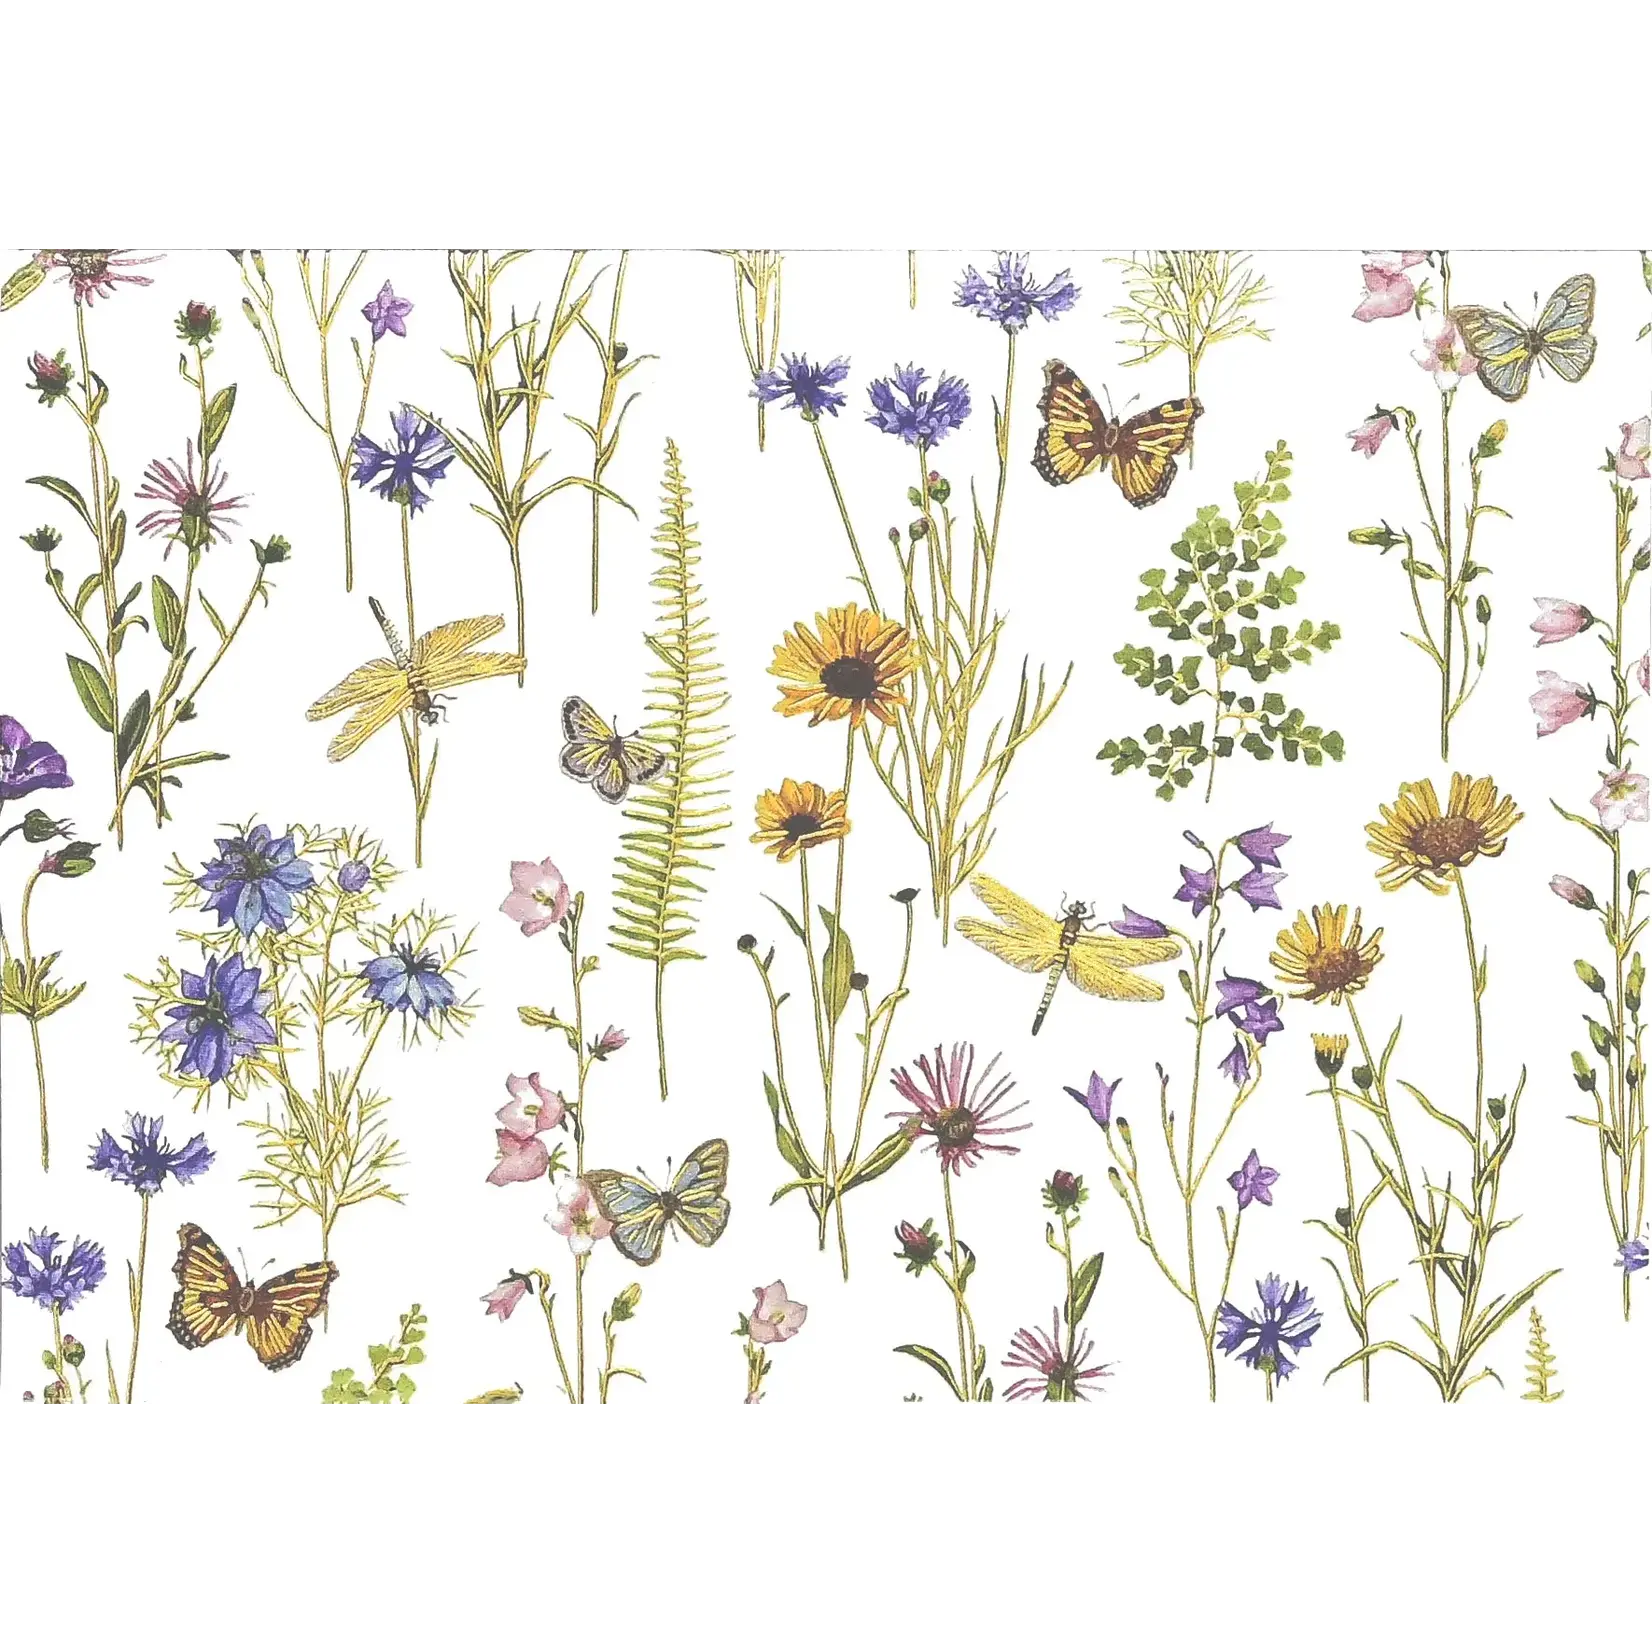 Peter Pauper Press Wildflower Garden Boxed Note Cards